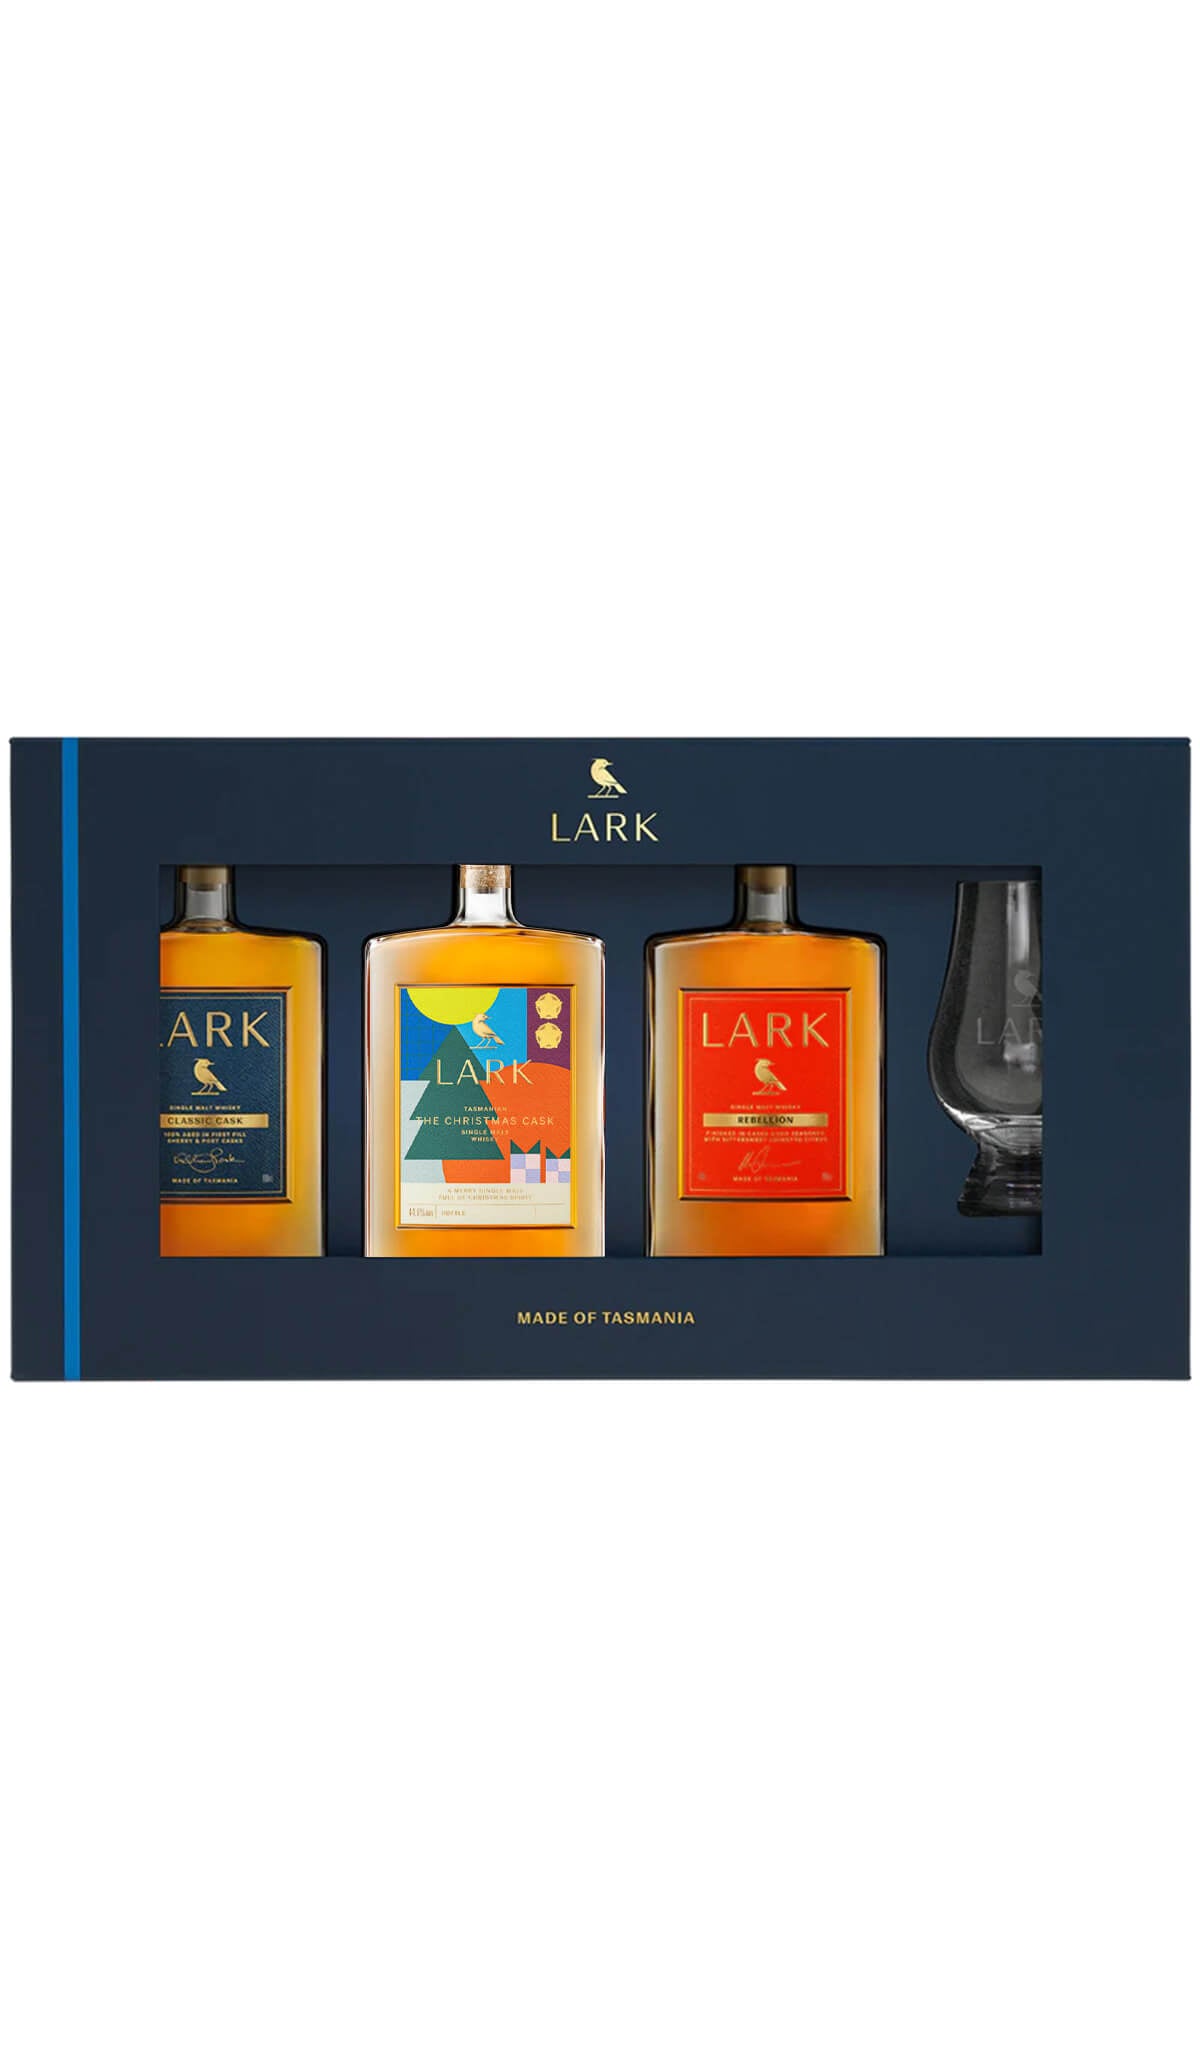 Find out more, explore the range and purchase The Lark Australian Whisky Christmas Flight 3 x 100mL available online at Wine Sellers Direct - Australia's independent liquor specialists.